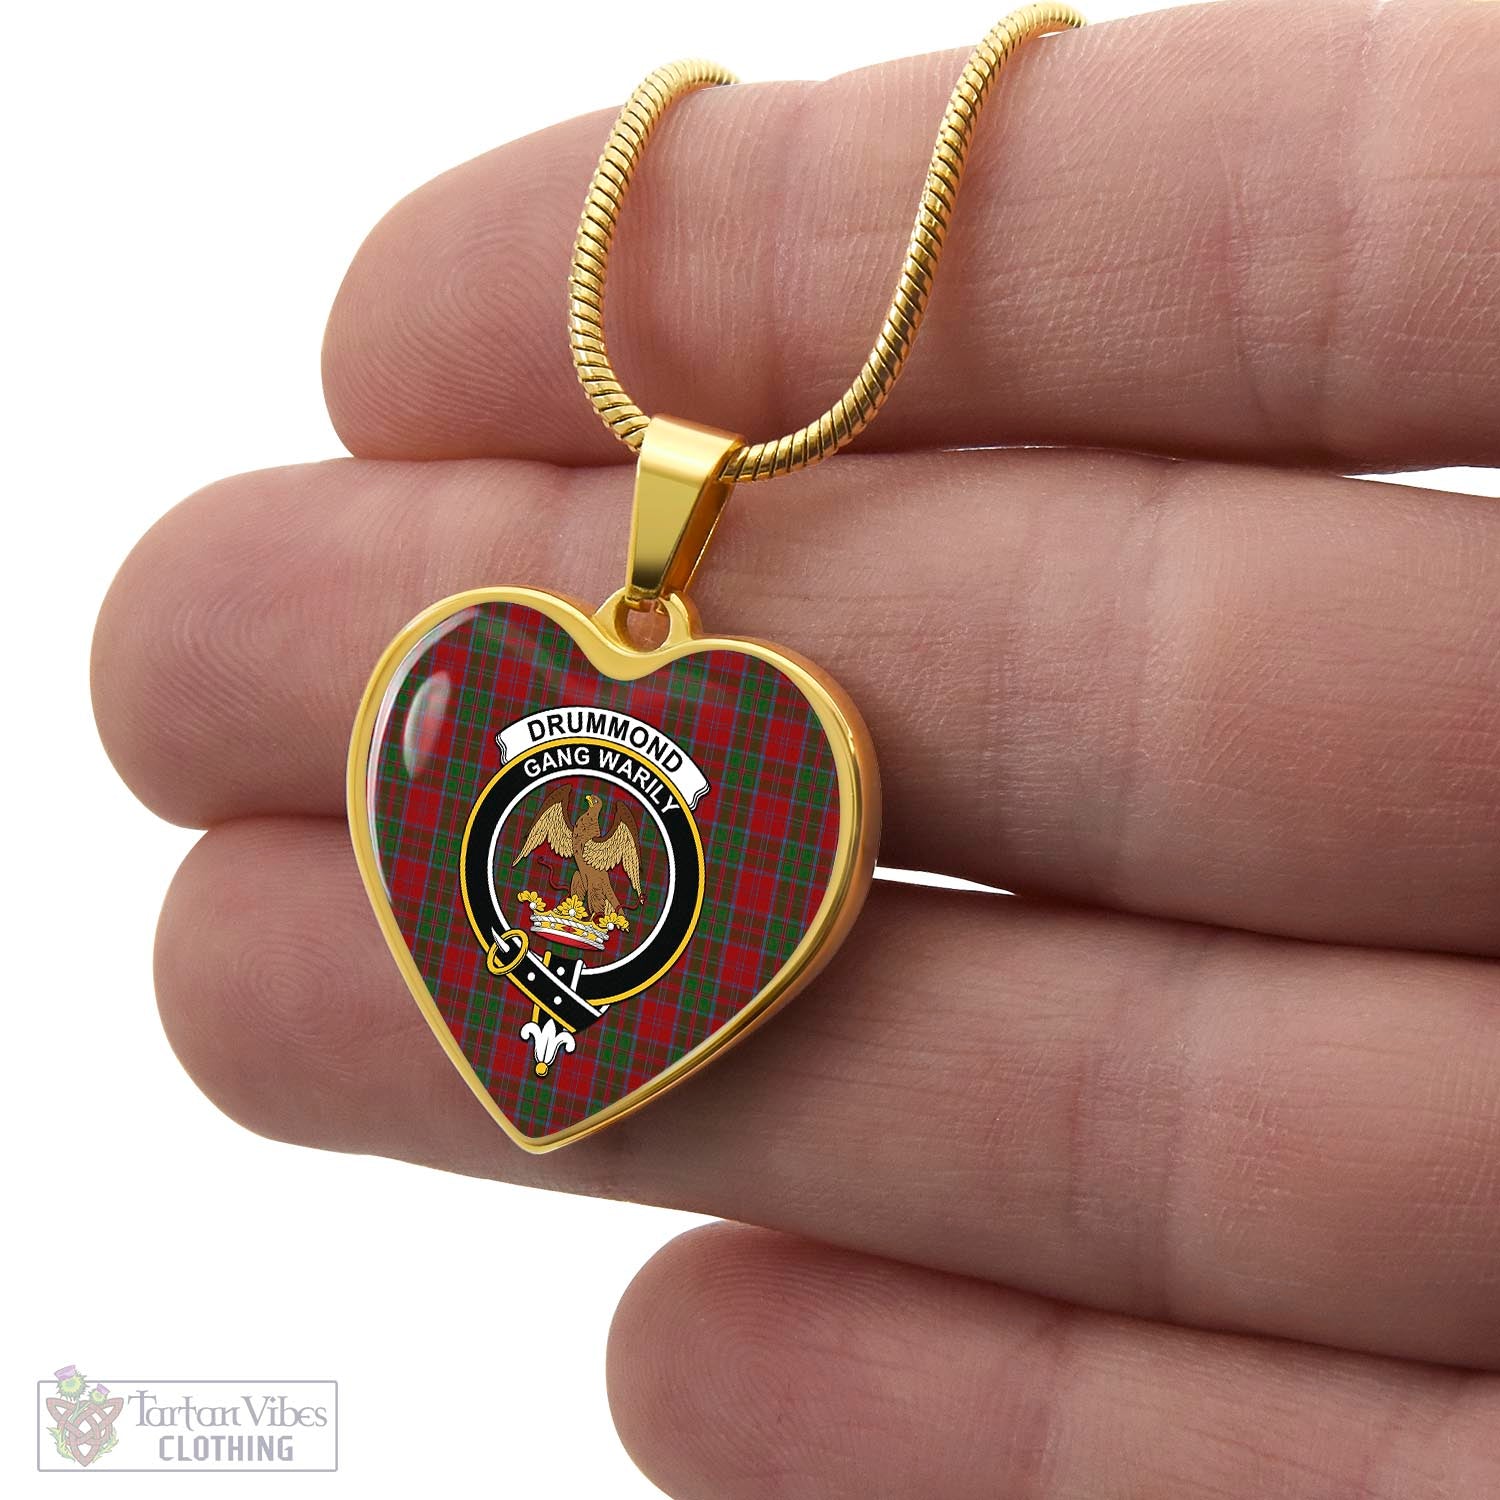 Tartan Vibes Clothing Drummond Tartan Heart Necklace with Family Crest